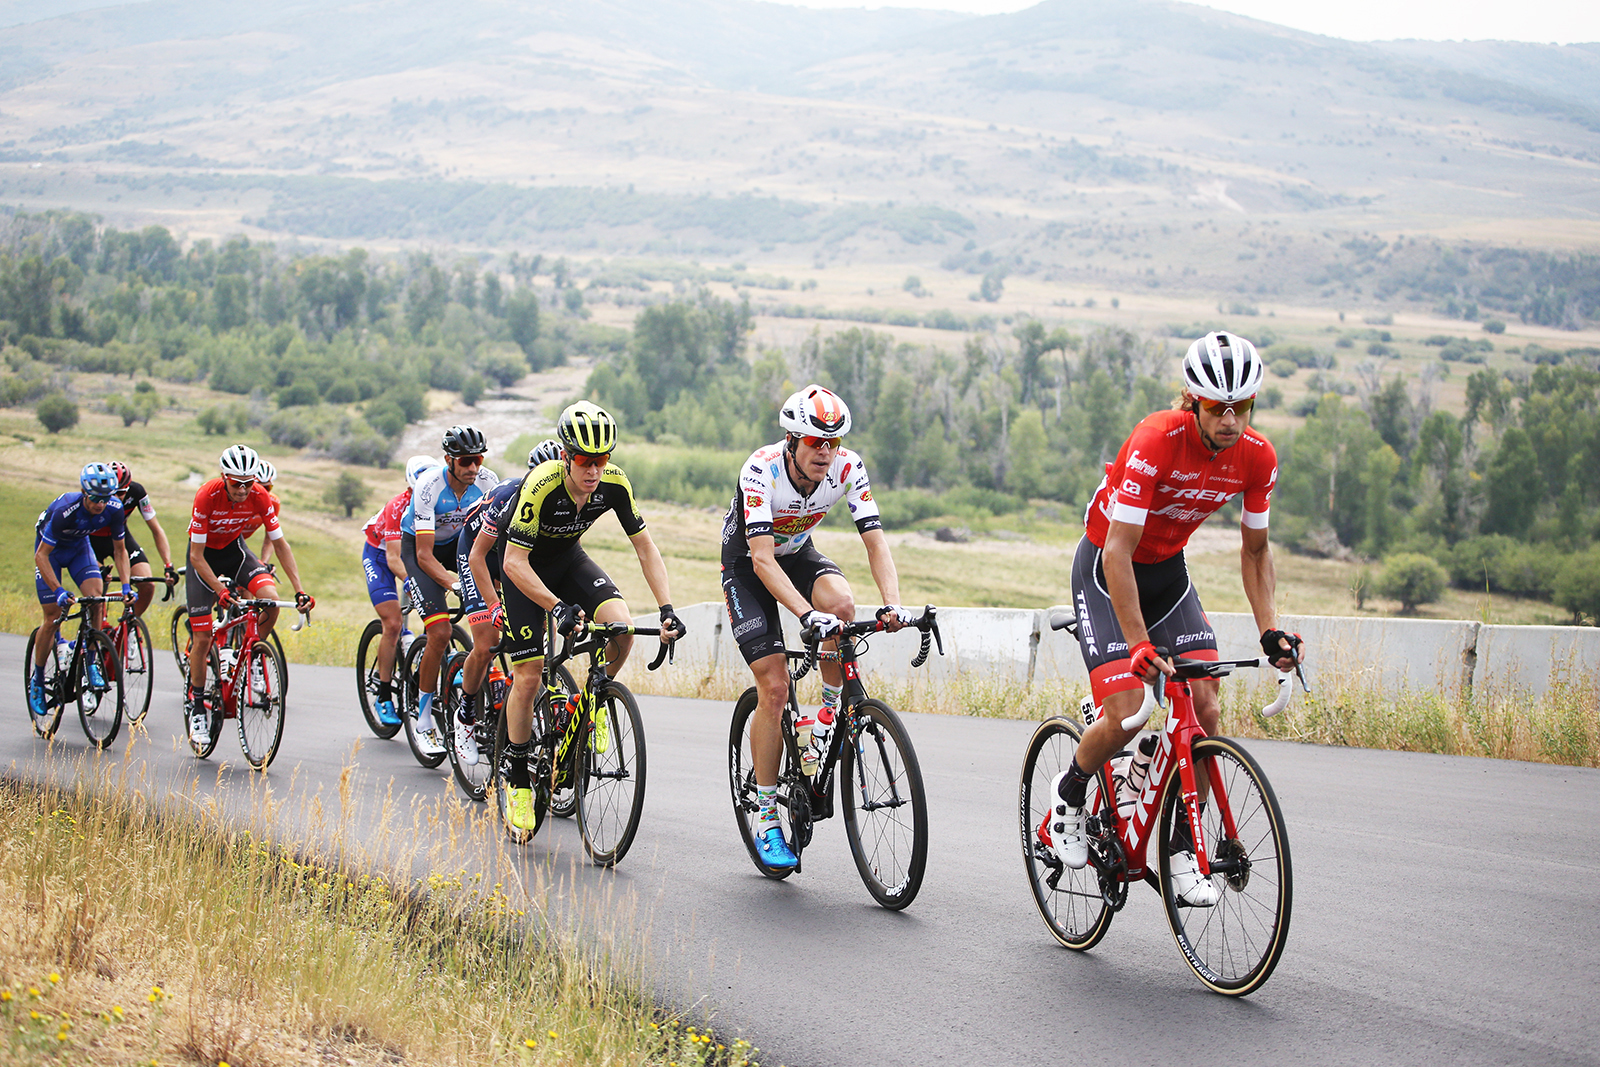 The break heads towards the gravel section.  Stage 5 of the 2018 Tour of Utah, August 10, 2018. Photo by Cathy Fegan-Kim, www.cottonsoxphotography.net